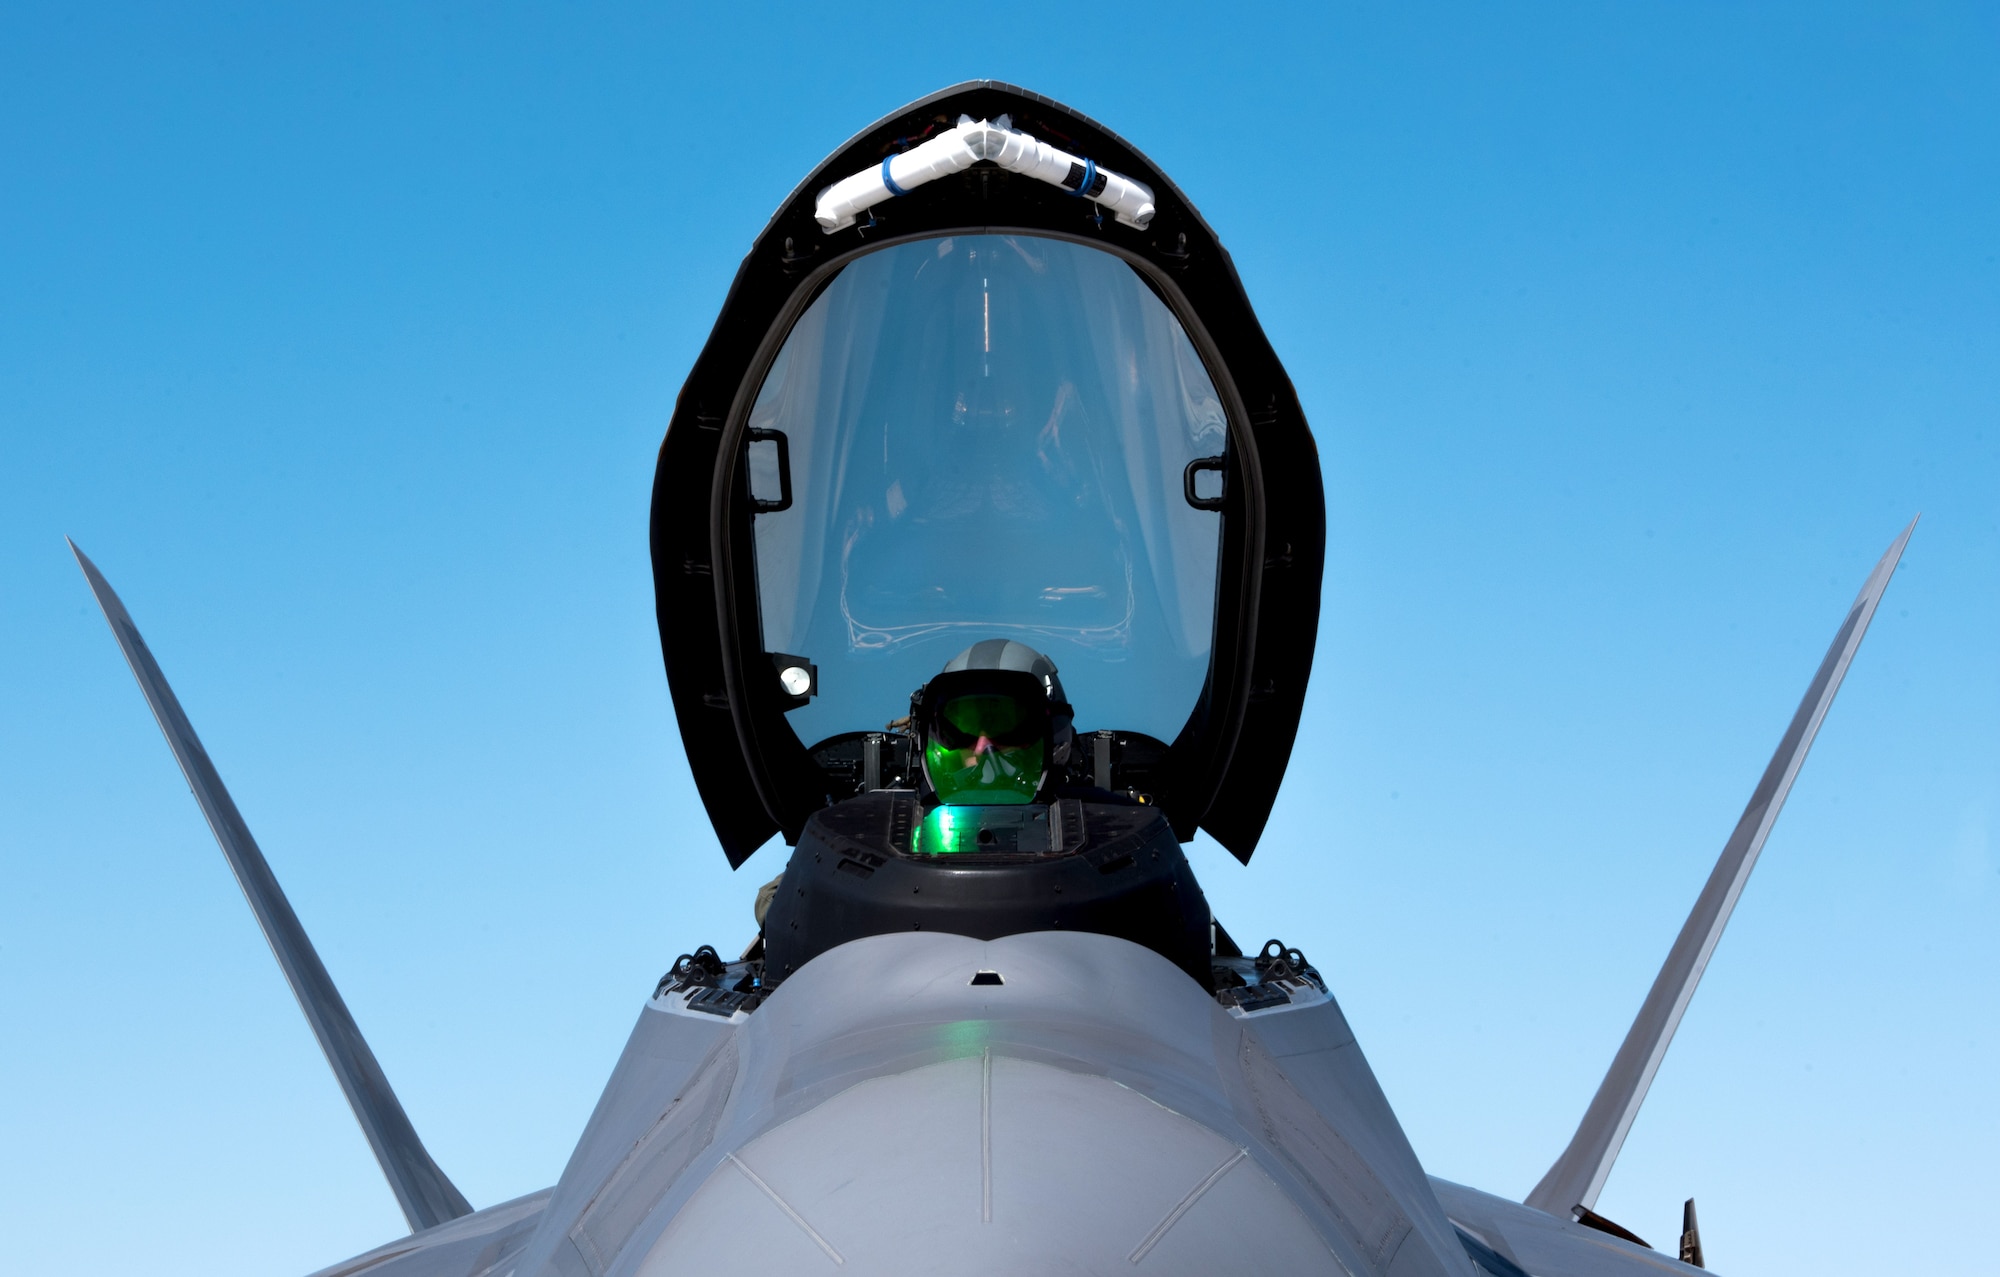 U.S Air Force Capt. Kidnap, 94th Fighter Squadron F-22 Raptor pilot, shuts his aircraft down after landing at Nellis Air Force Base, Nev., August 18,2017. The 94th FS is currently deployed to Red Flag 17-4, taking part in an multi-dimensional simulated air and ground combat environment. (U.S. Air Force photo by Staff Sgt. Carlin Leslie)